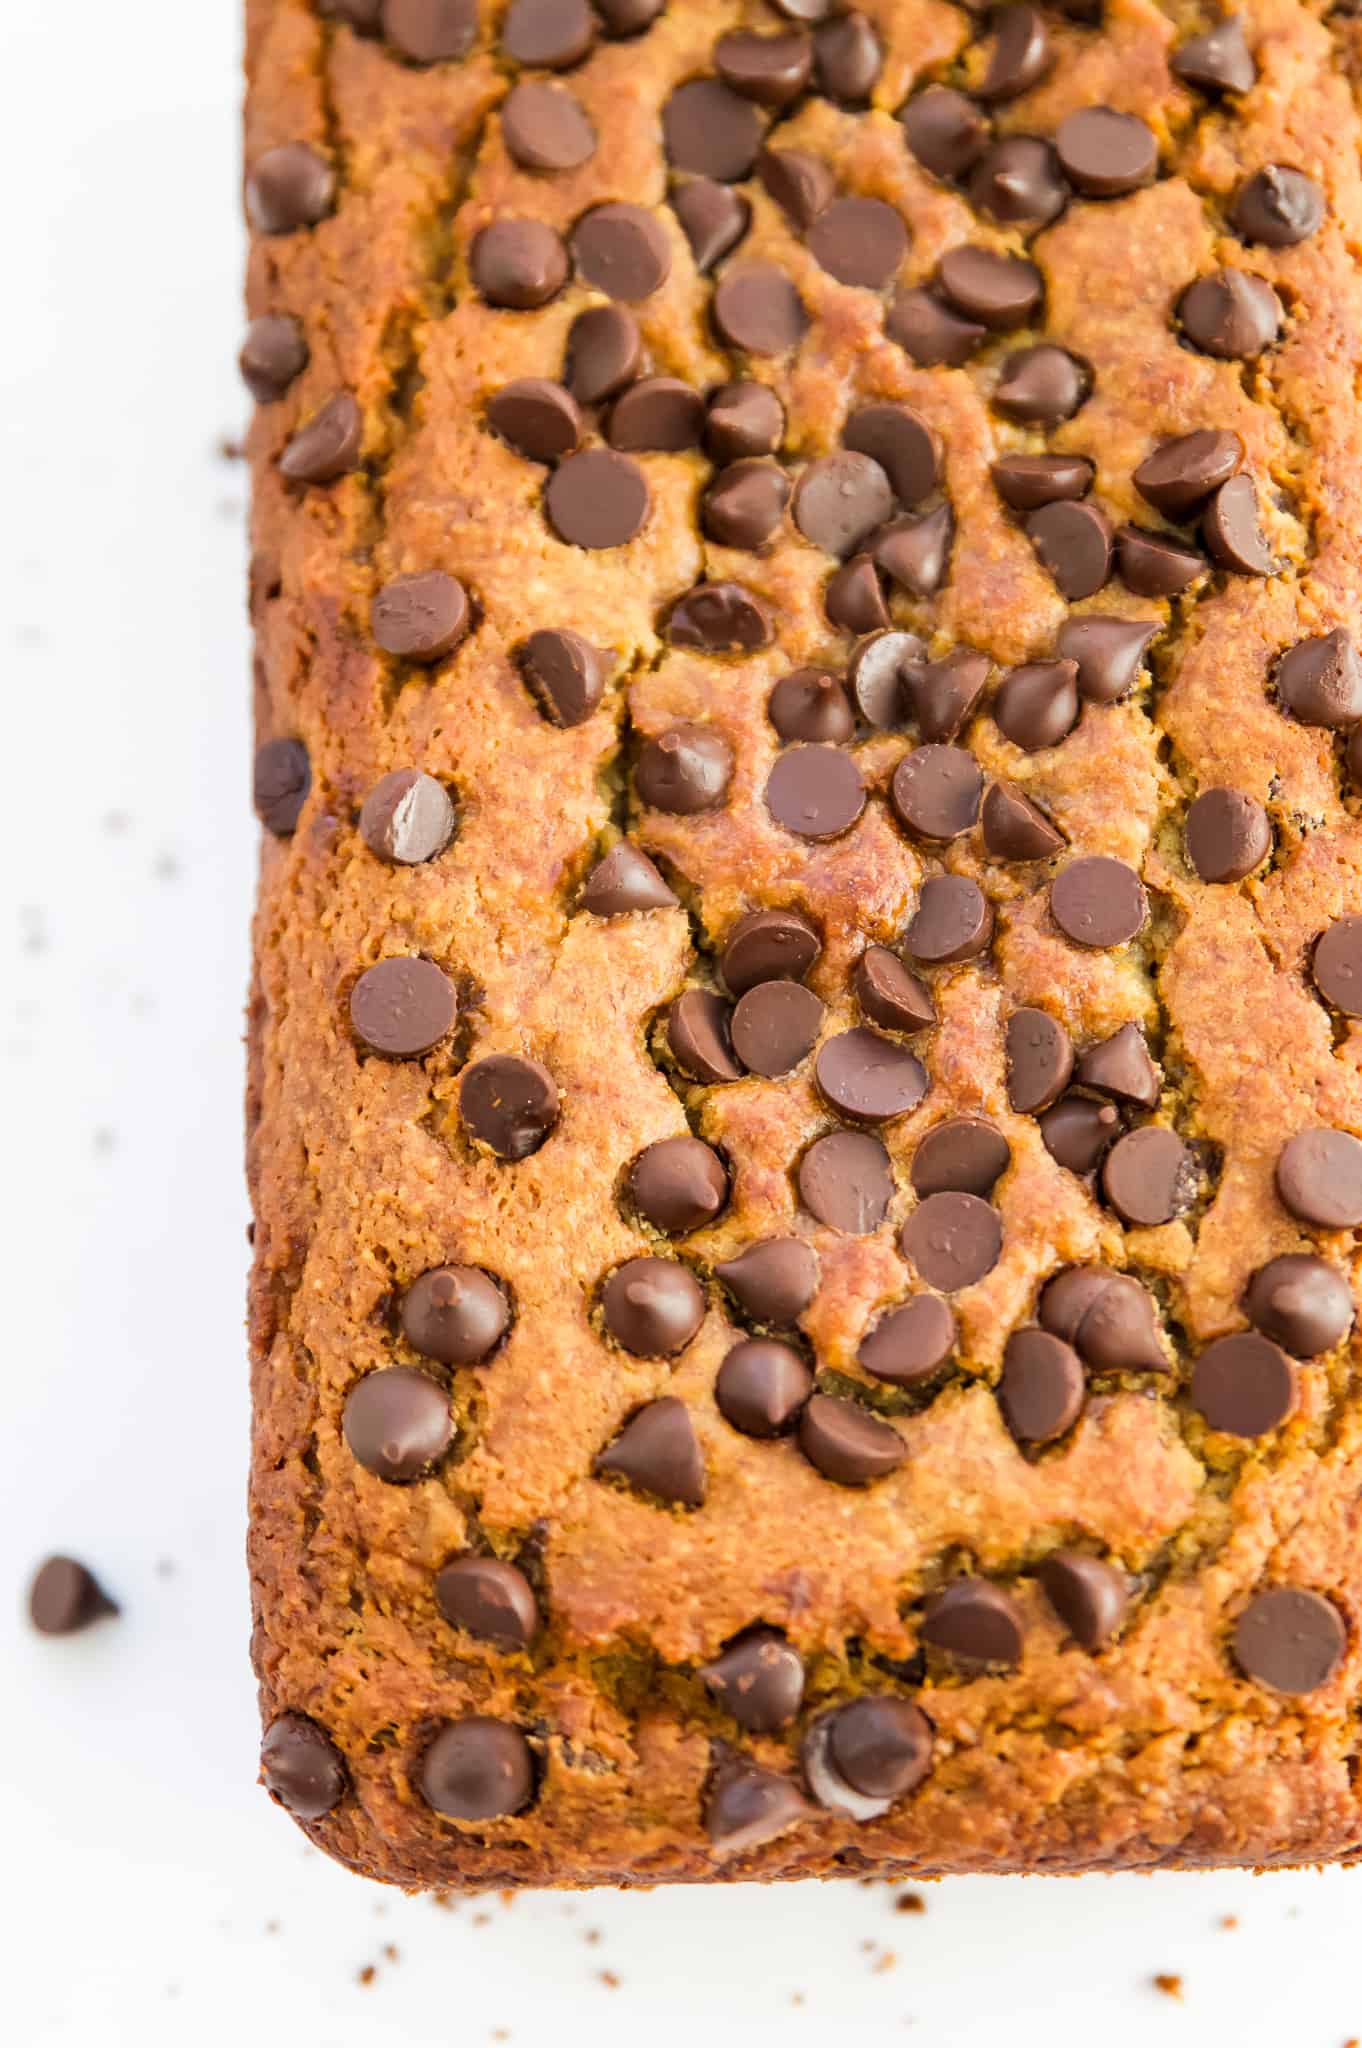 A loaf of gluten free chocolate chip banana bread with chocolate chips around it.